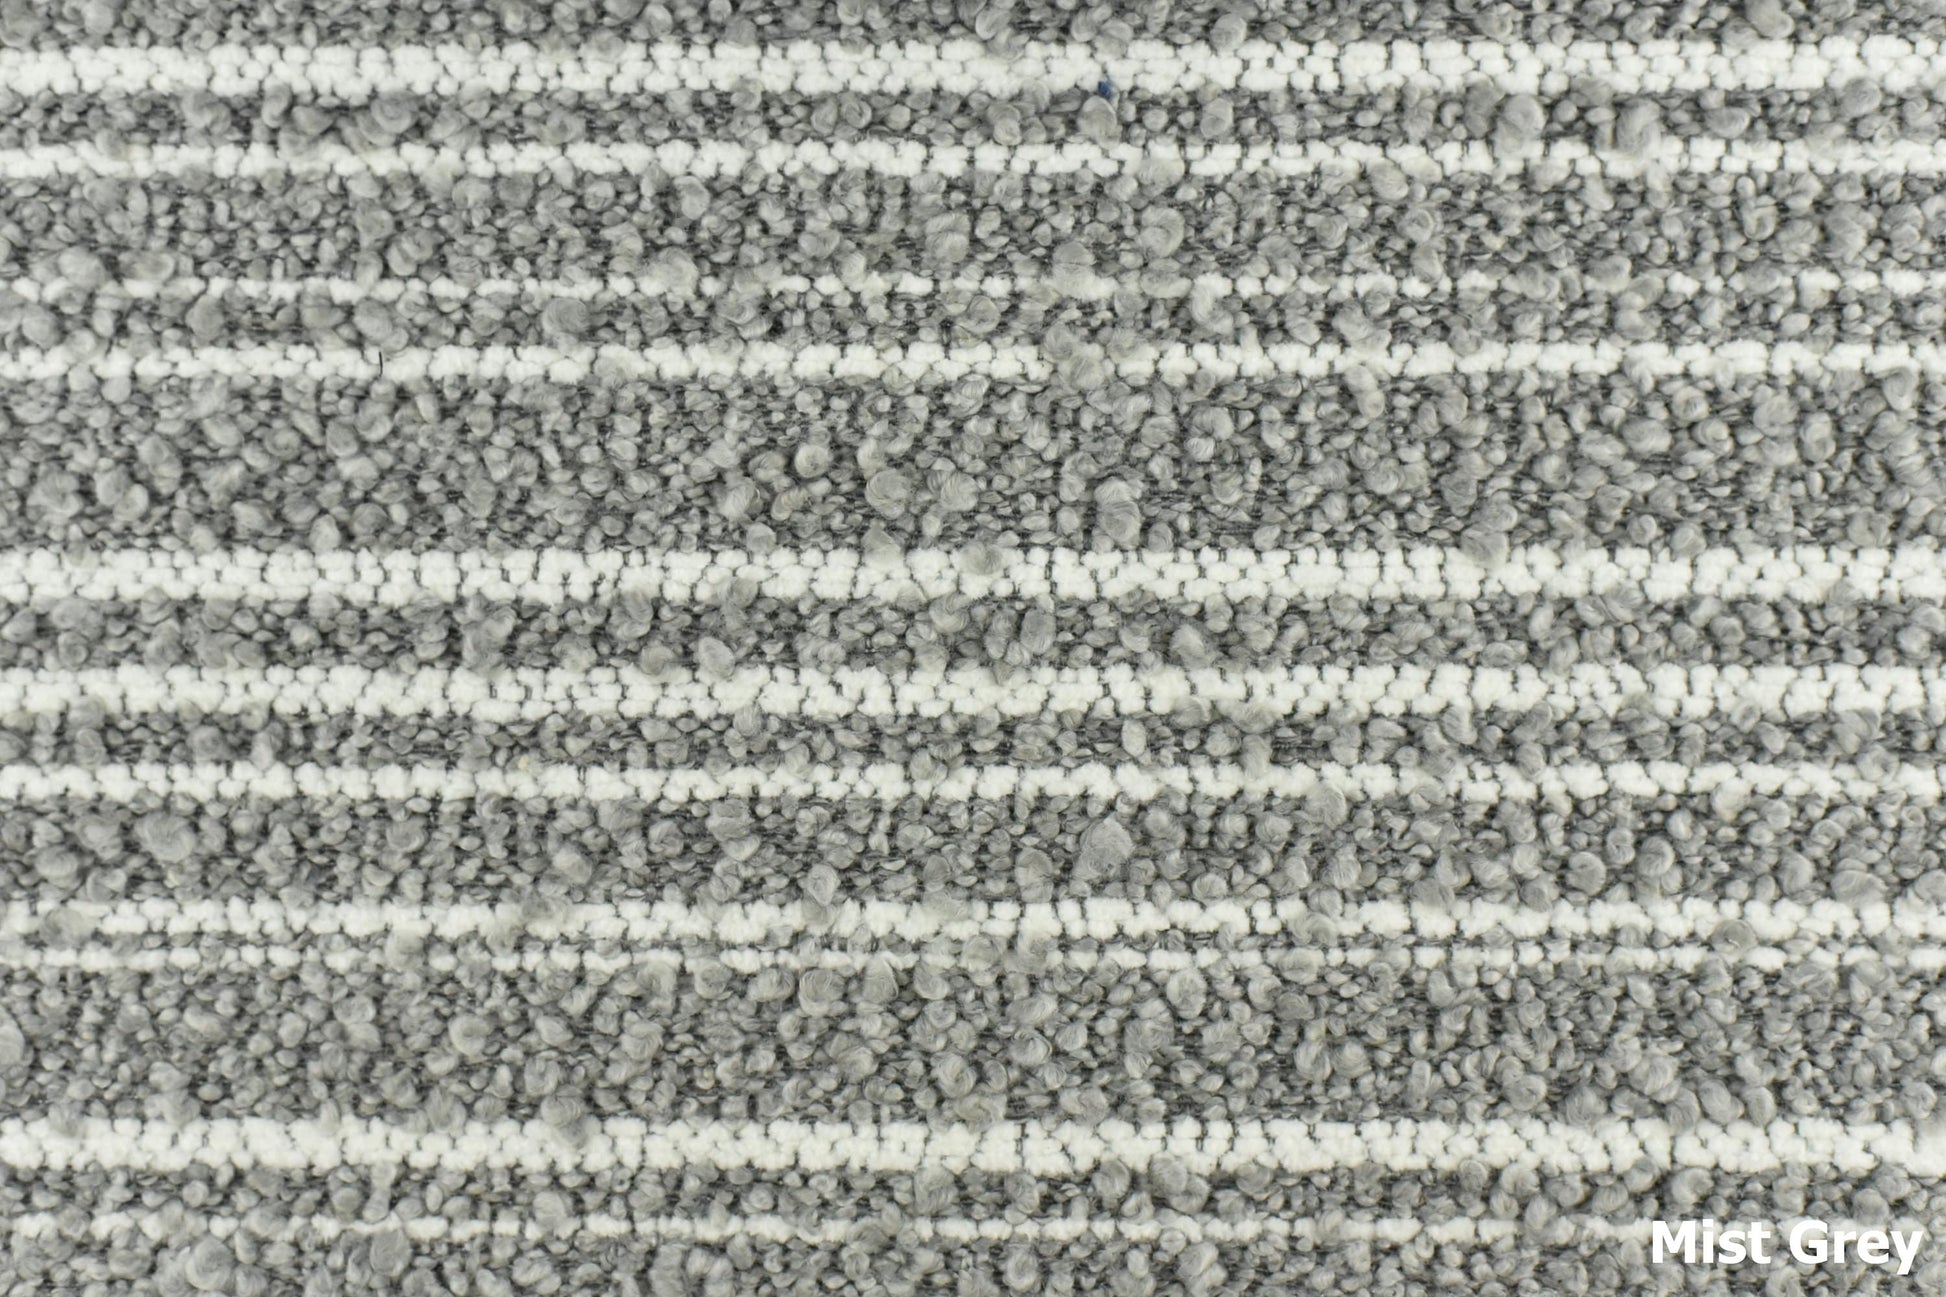 White Black Stripes Texture Boucle Upholstery Fabric|Musturd Yellow Boucle Fabric For Chair Soft Hand|Thick Green Boucle For Bench Ottoman Mist Gray